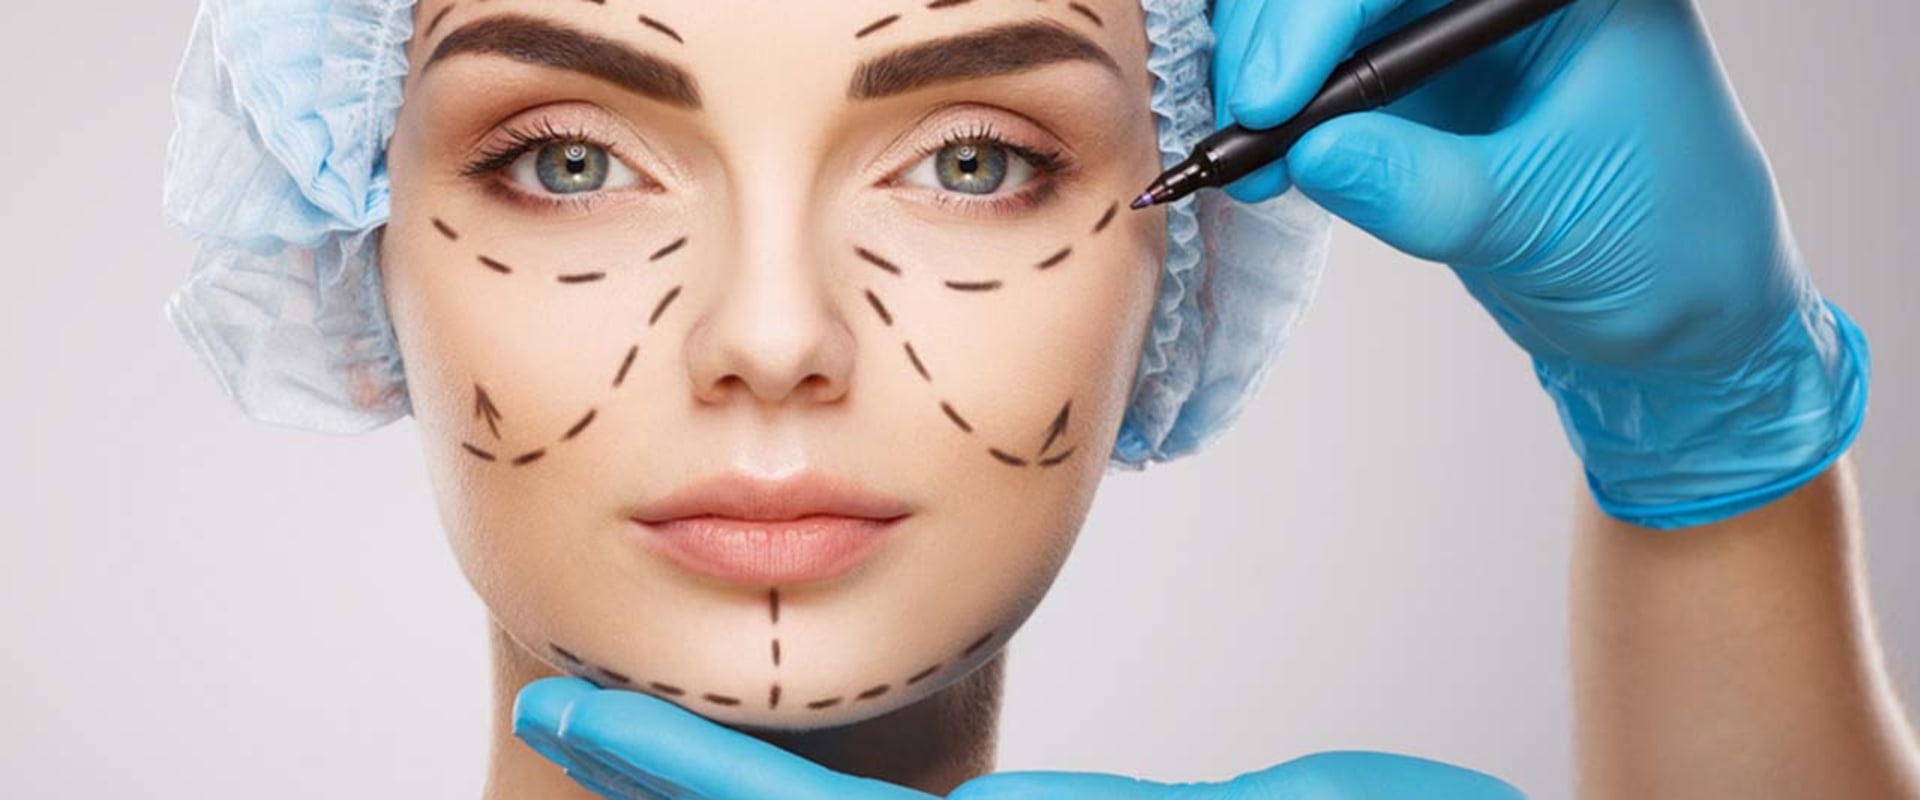 The Pros and Cons of Plastic Surgery: What You Need to Know